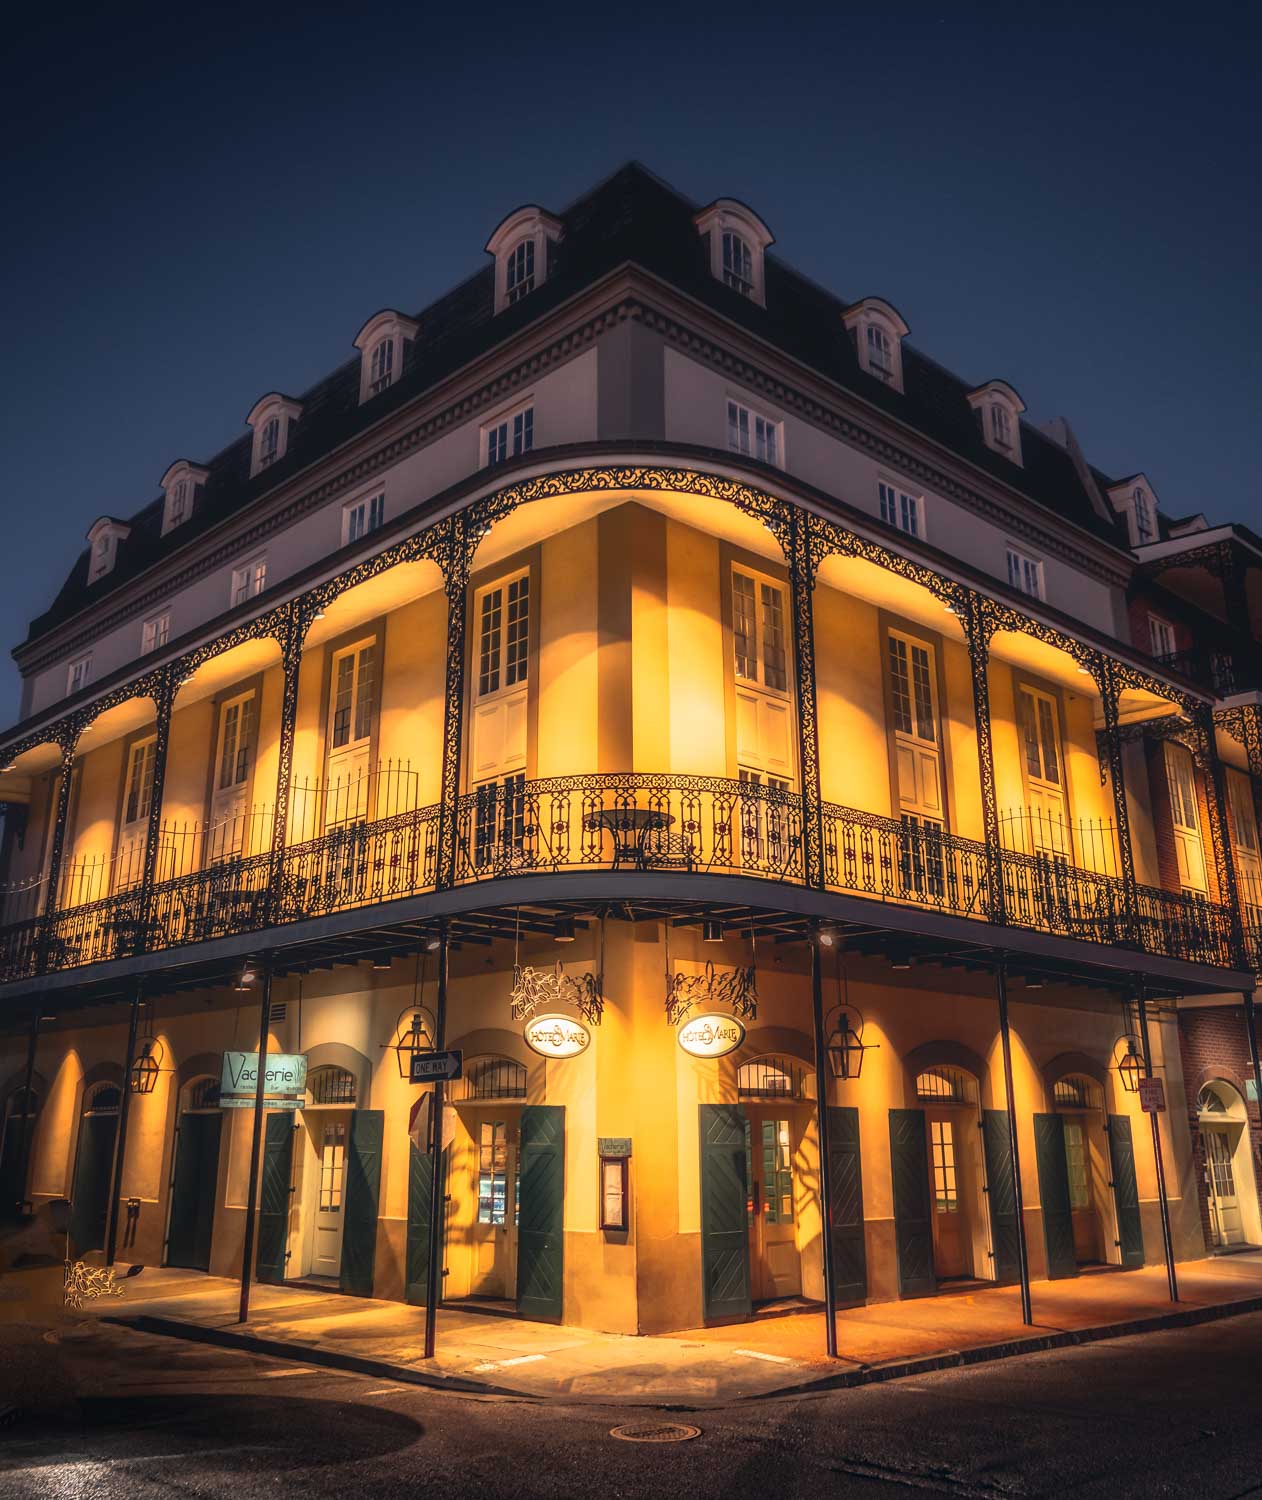 2 Days in New Orleans Itinerary